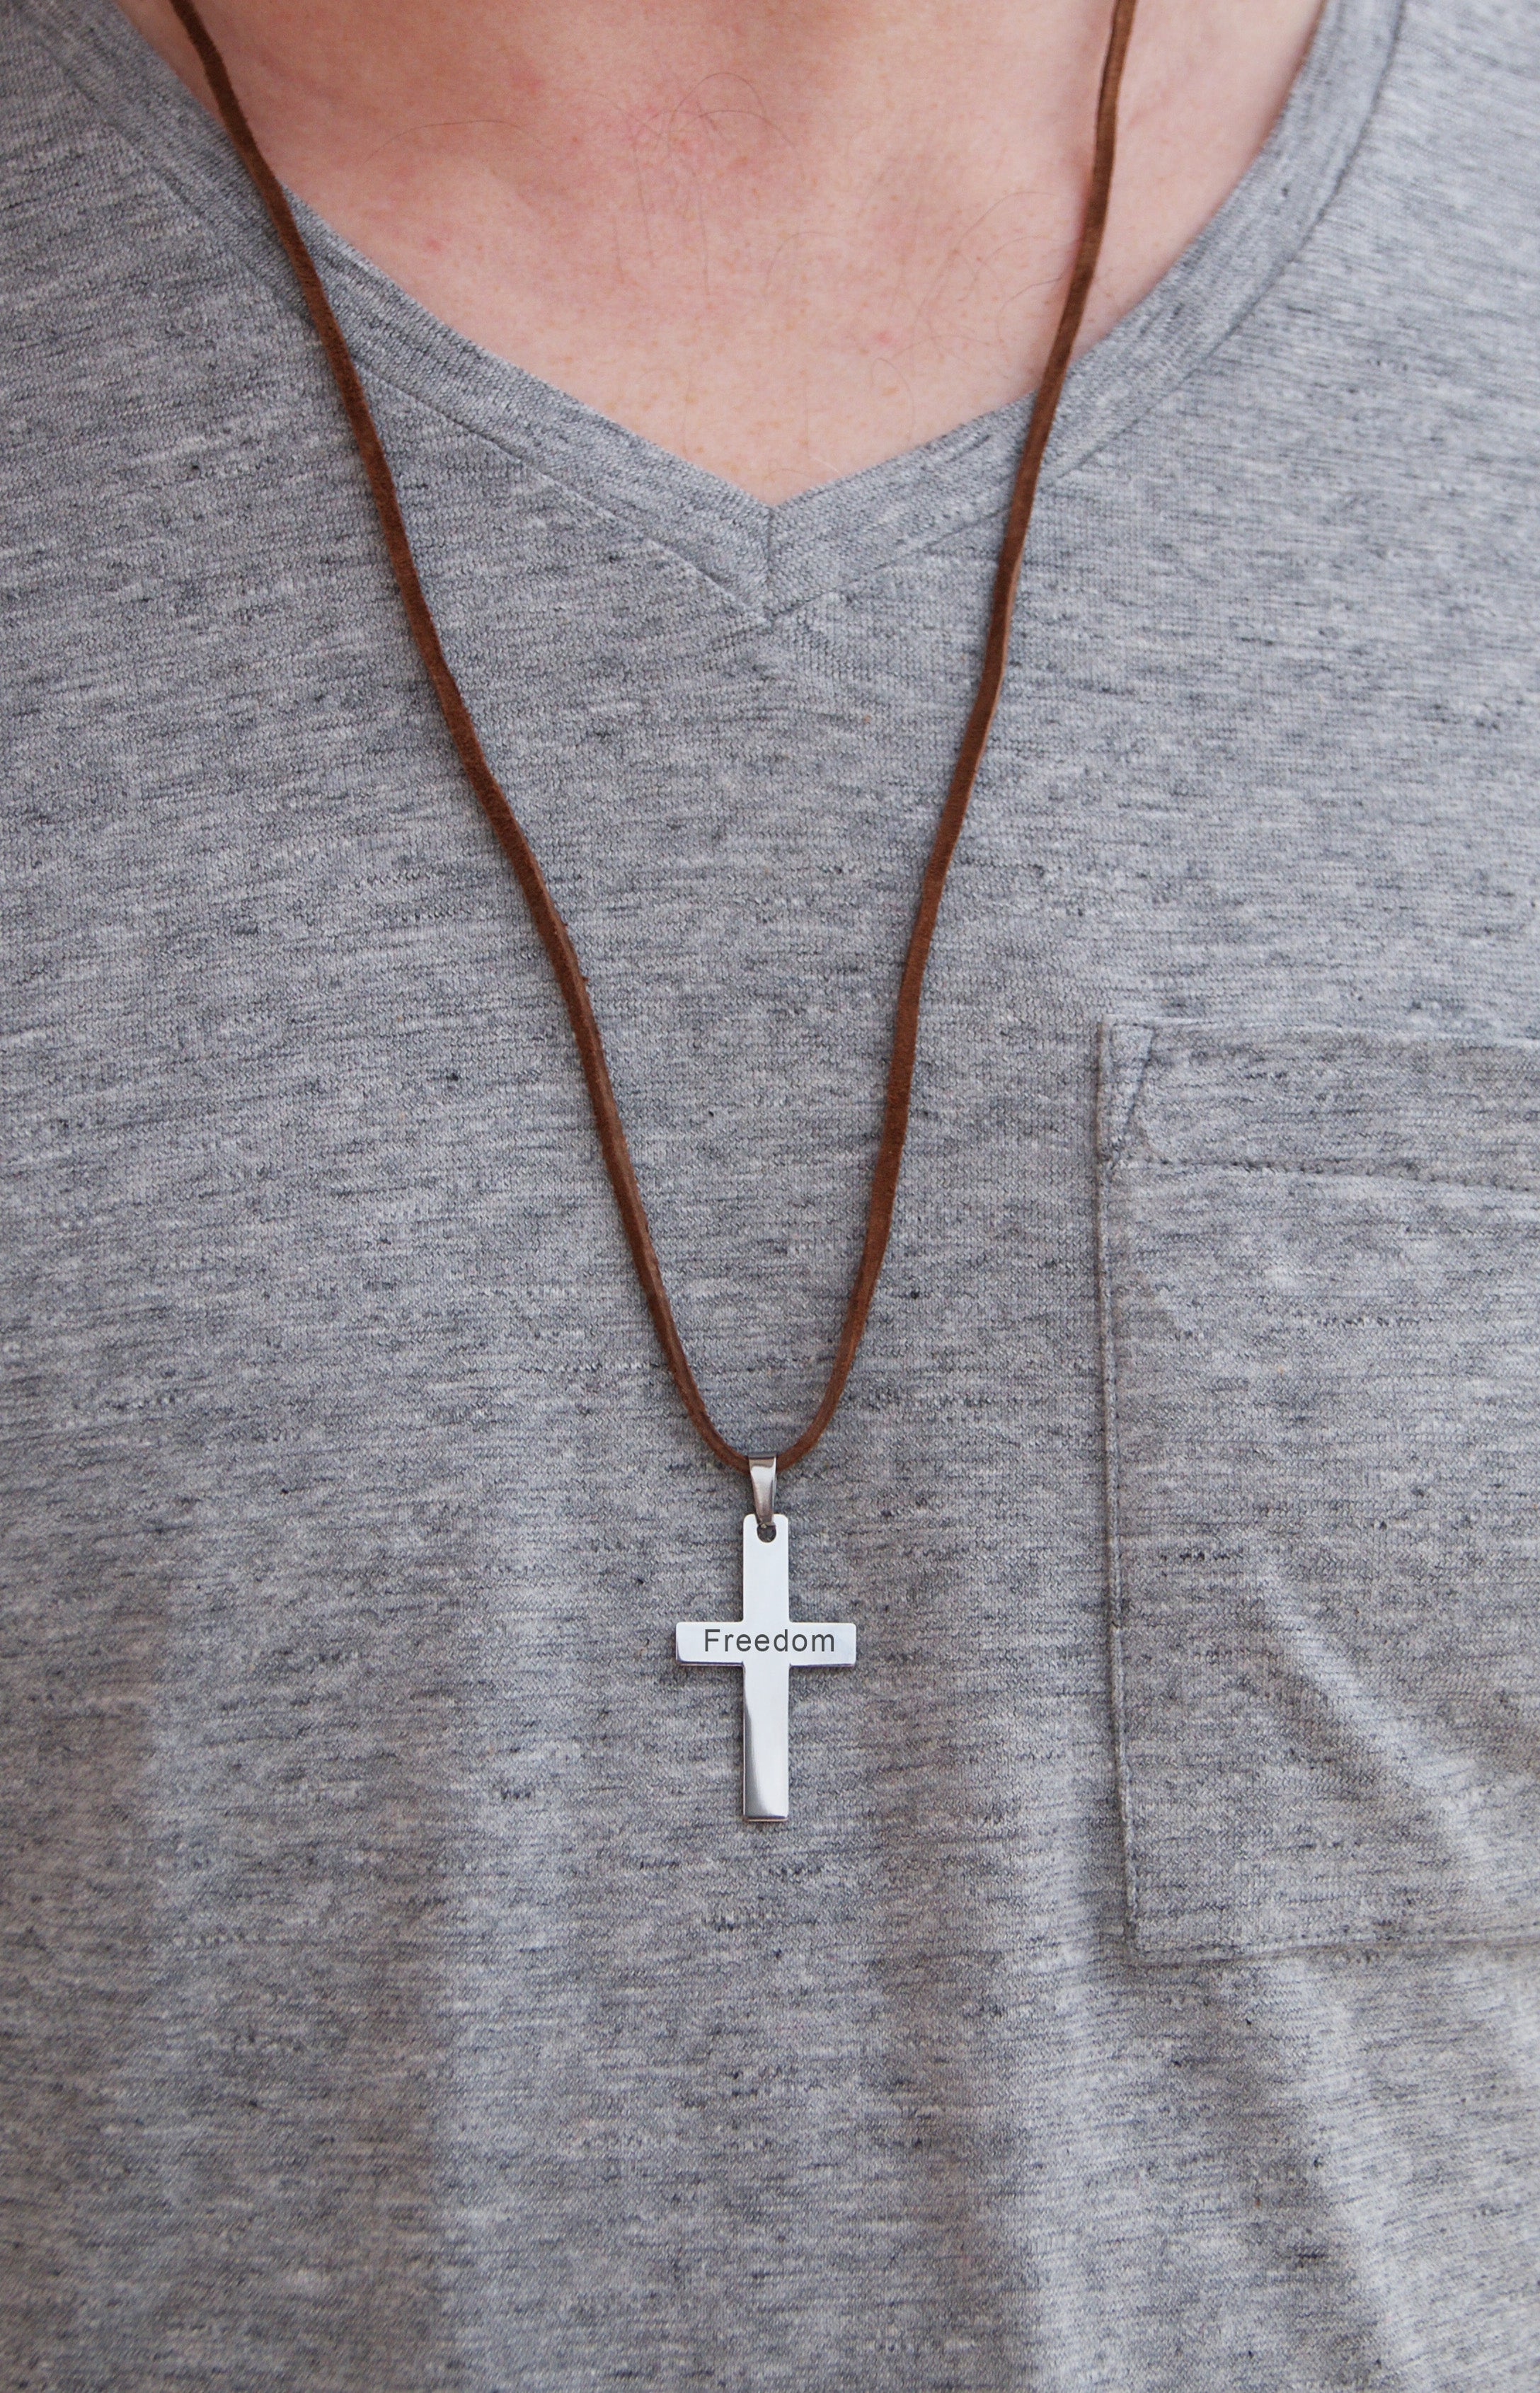 Cross Necklace - Silver Cross Pendant for Men Jewelry - Gift for Him -  Nadin Art Design - Personalized Jewelry